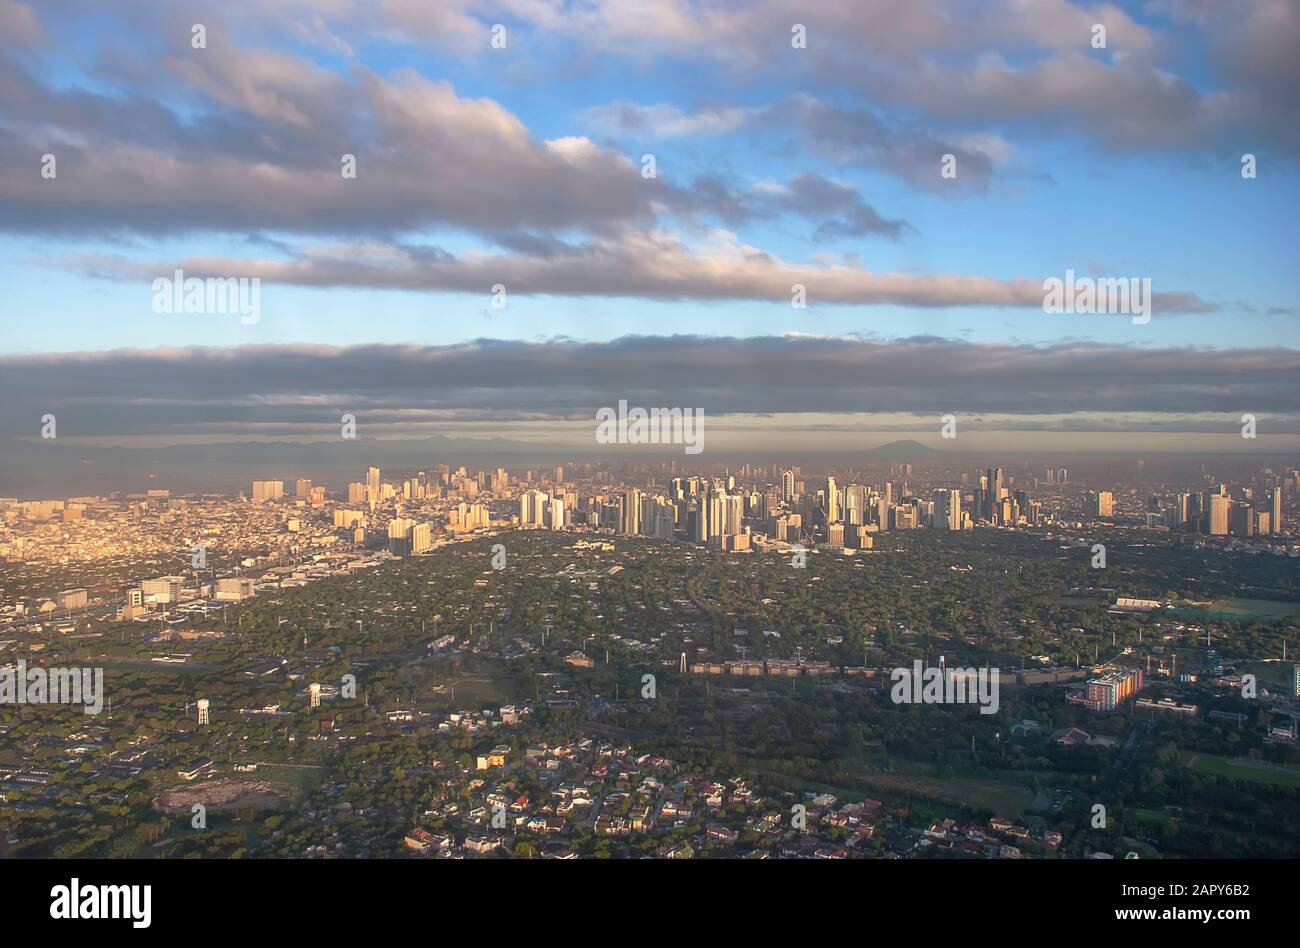 The city of Manila in the Philippines just after daybreak Stock Photo